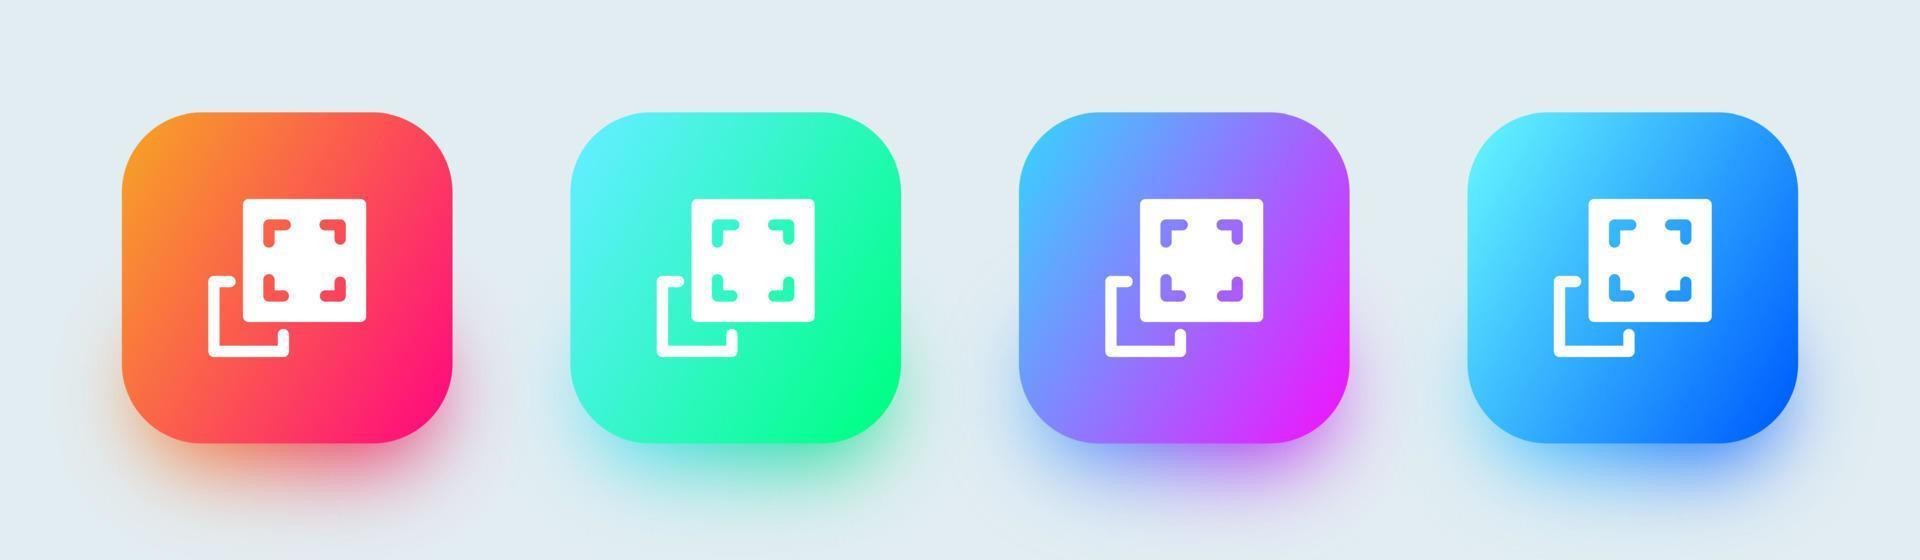 Full screen solid icon in square gradient colors. Multimedia signs vector illustration.